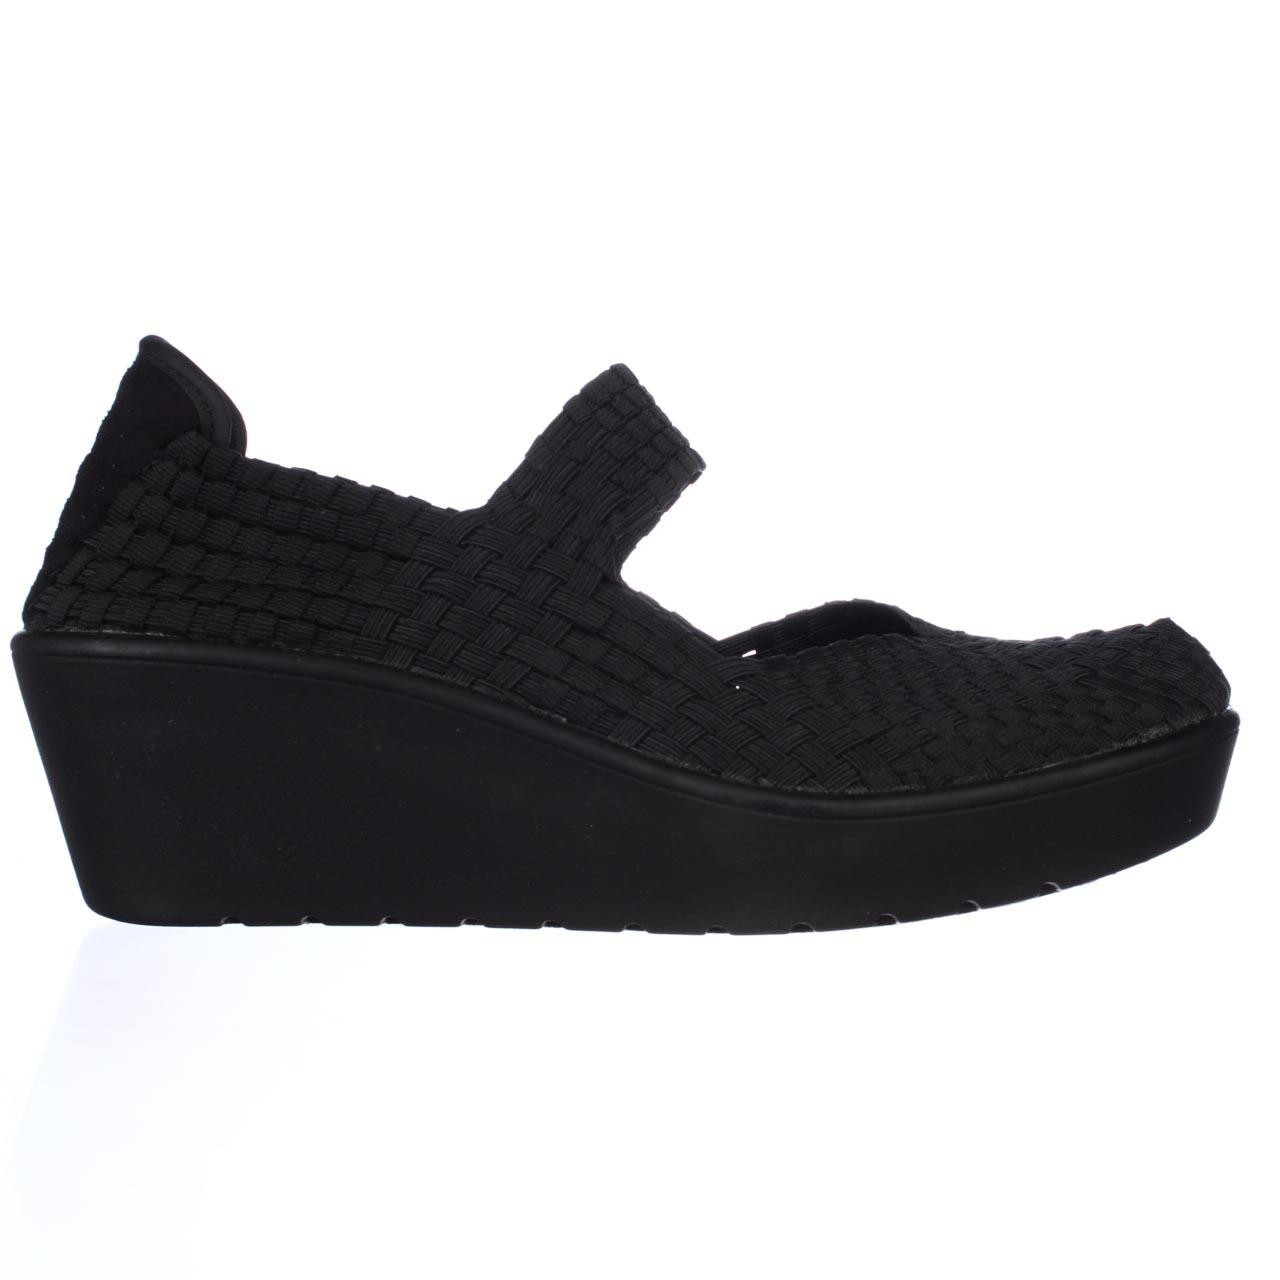 Steve madden Steven Brice Woven Stretch Comfort Mary Janes in Black | Lyst